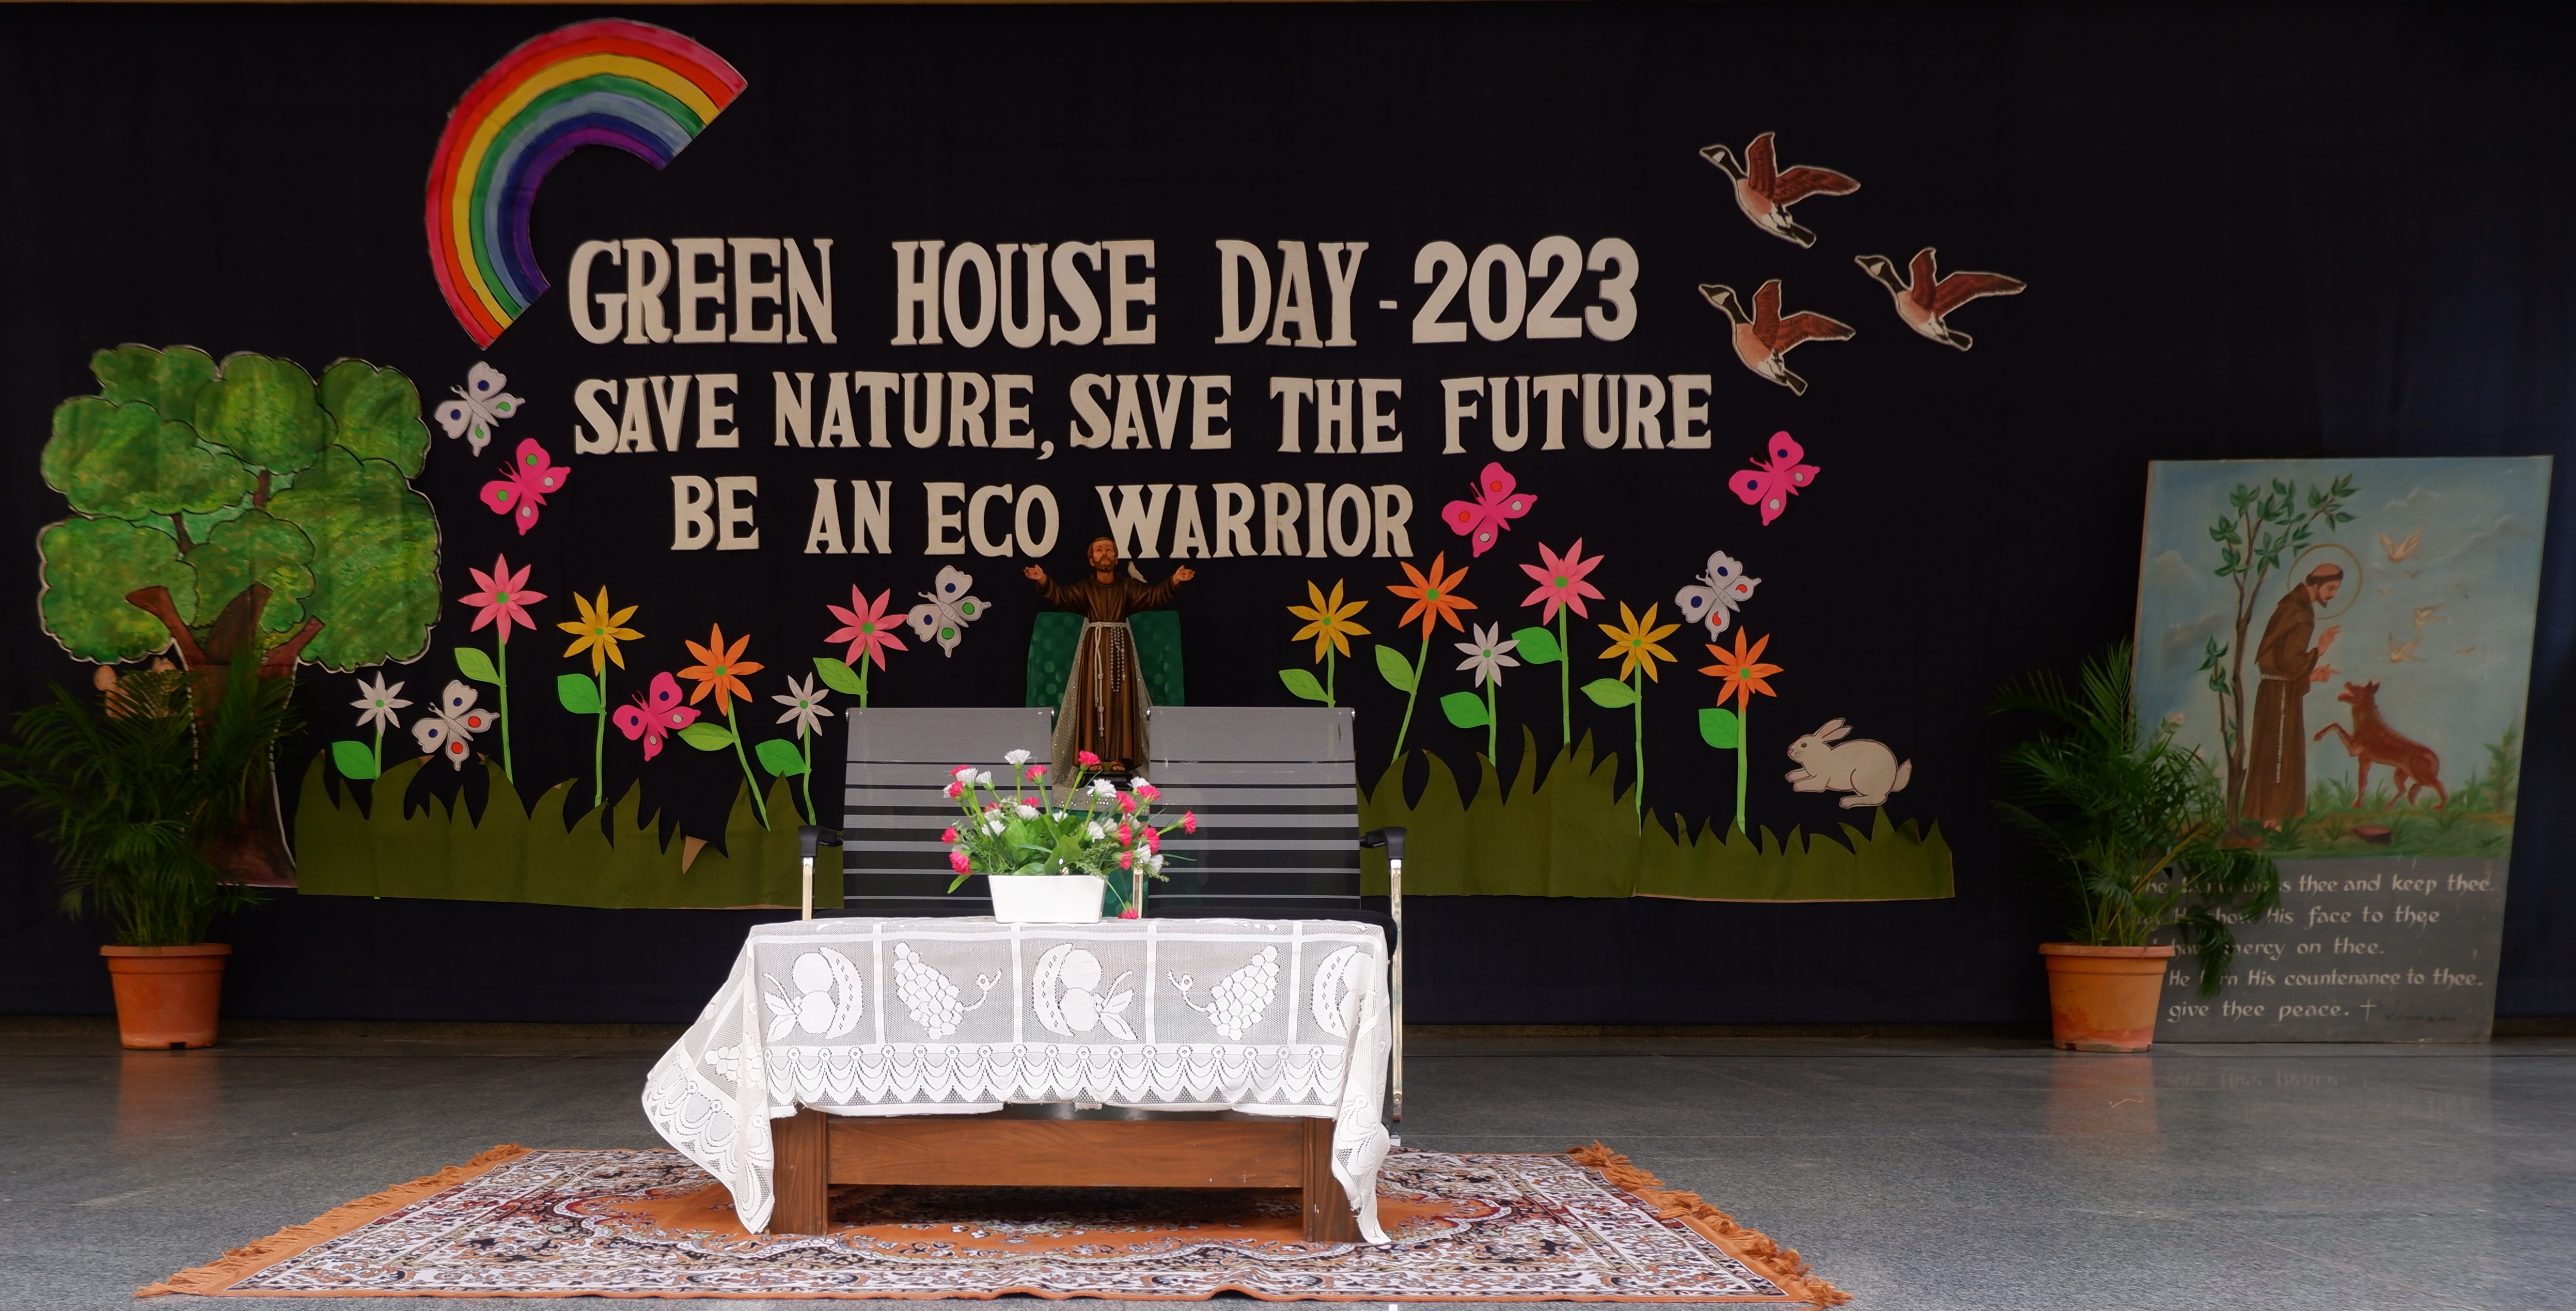 GREEN HOUSE DAY